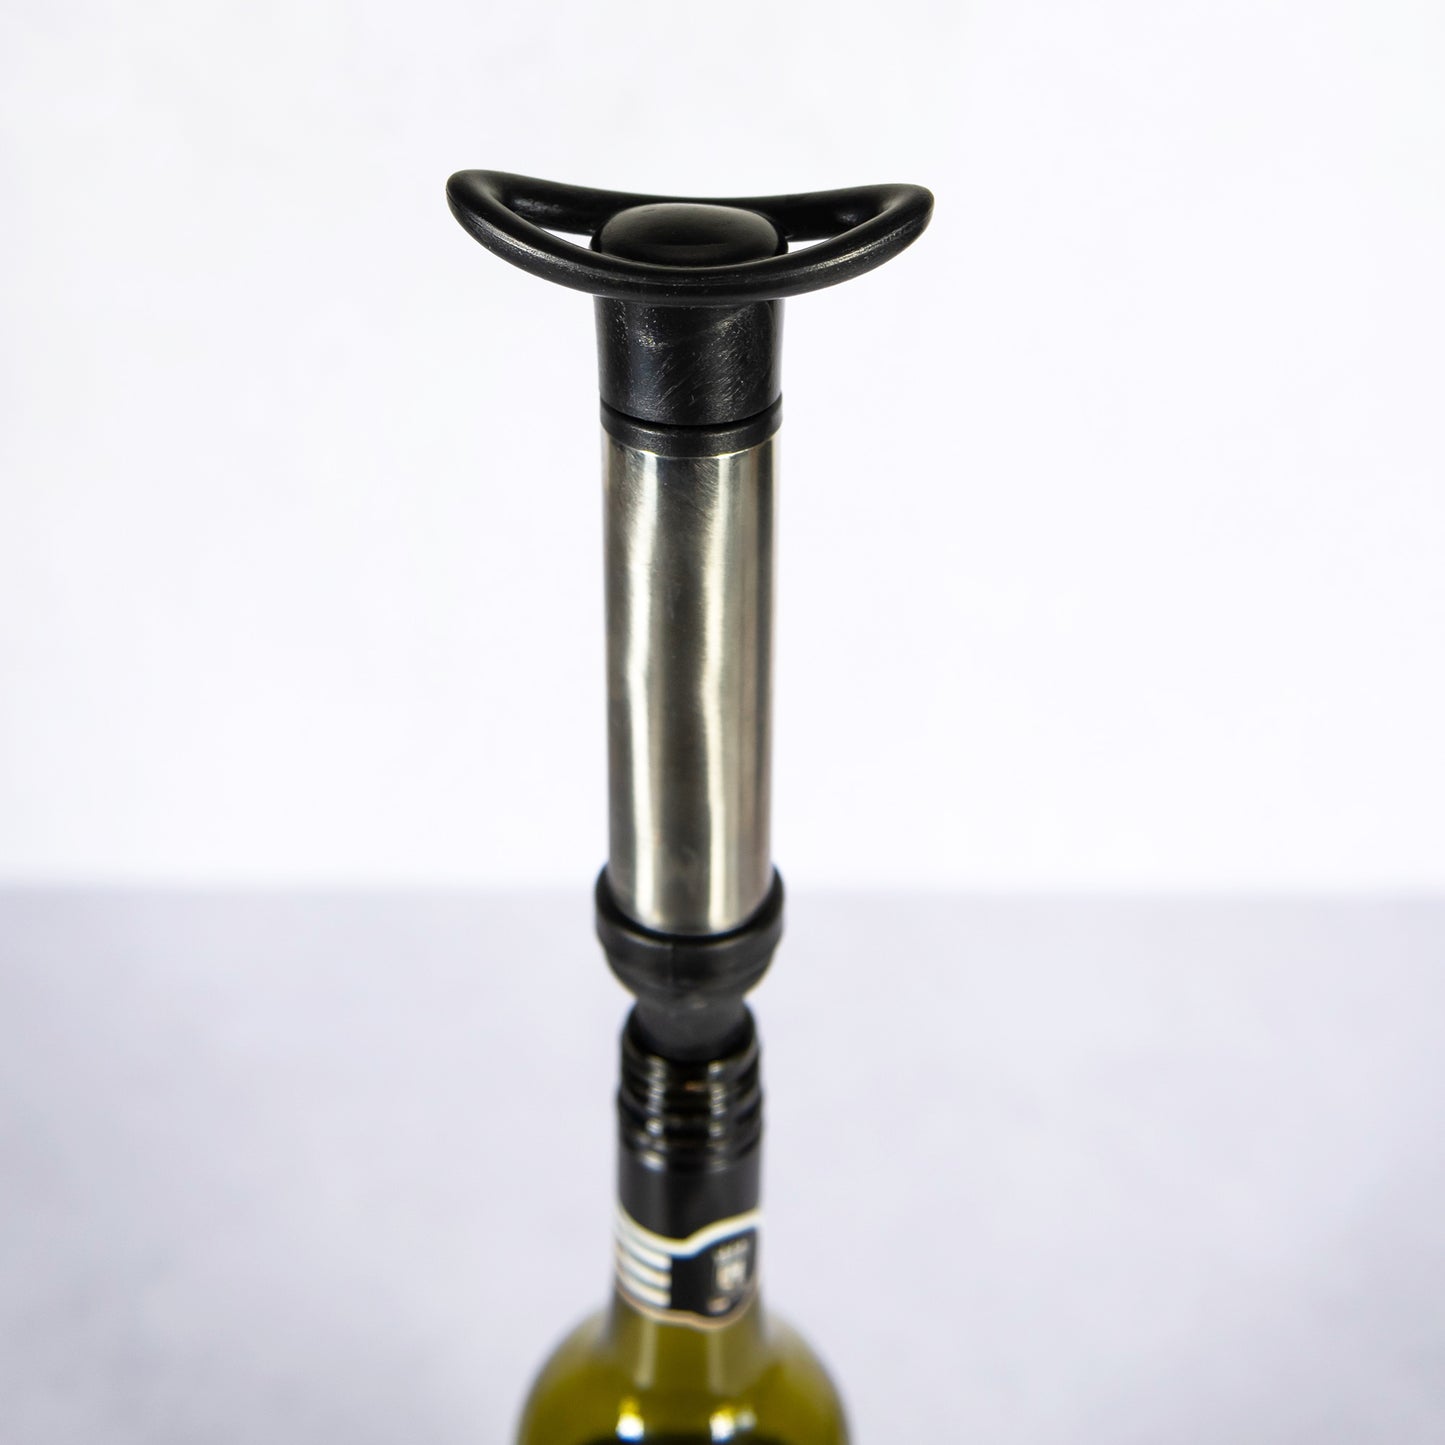 Vacuum Wine Saver Pump with 2 Reusable Cork Stoppers